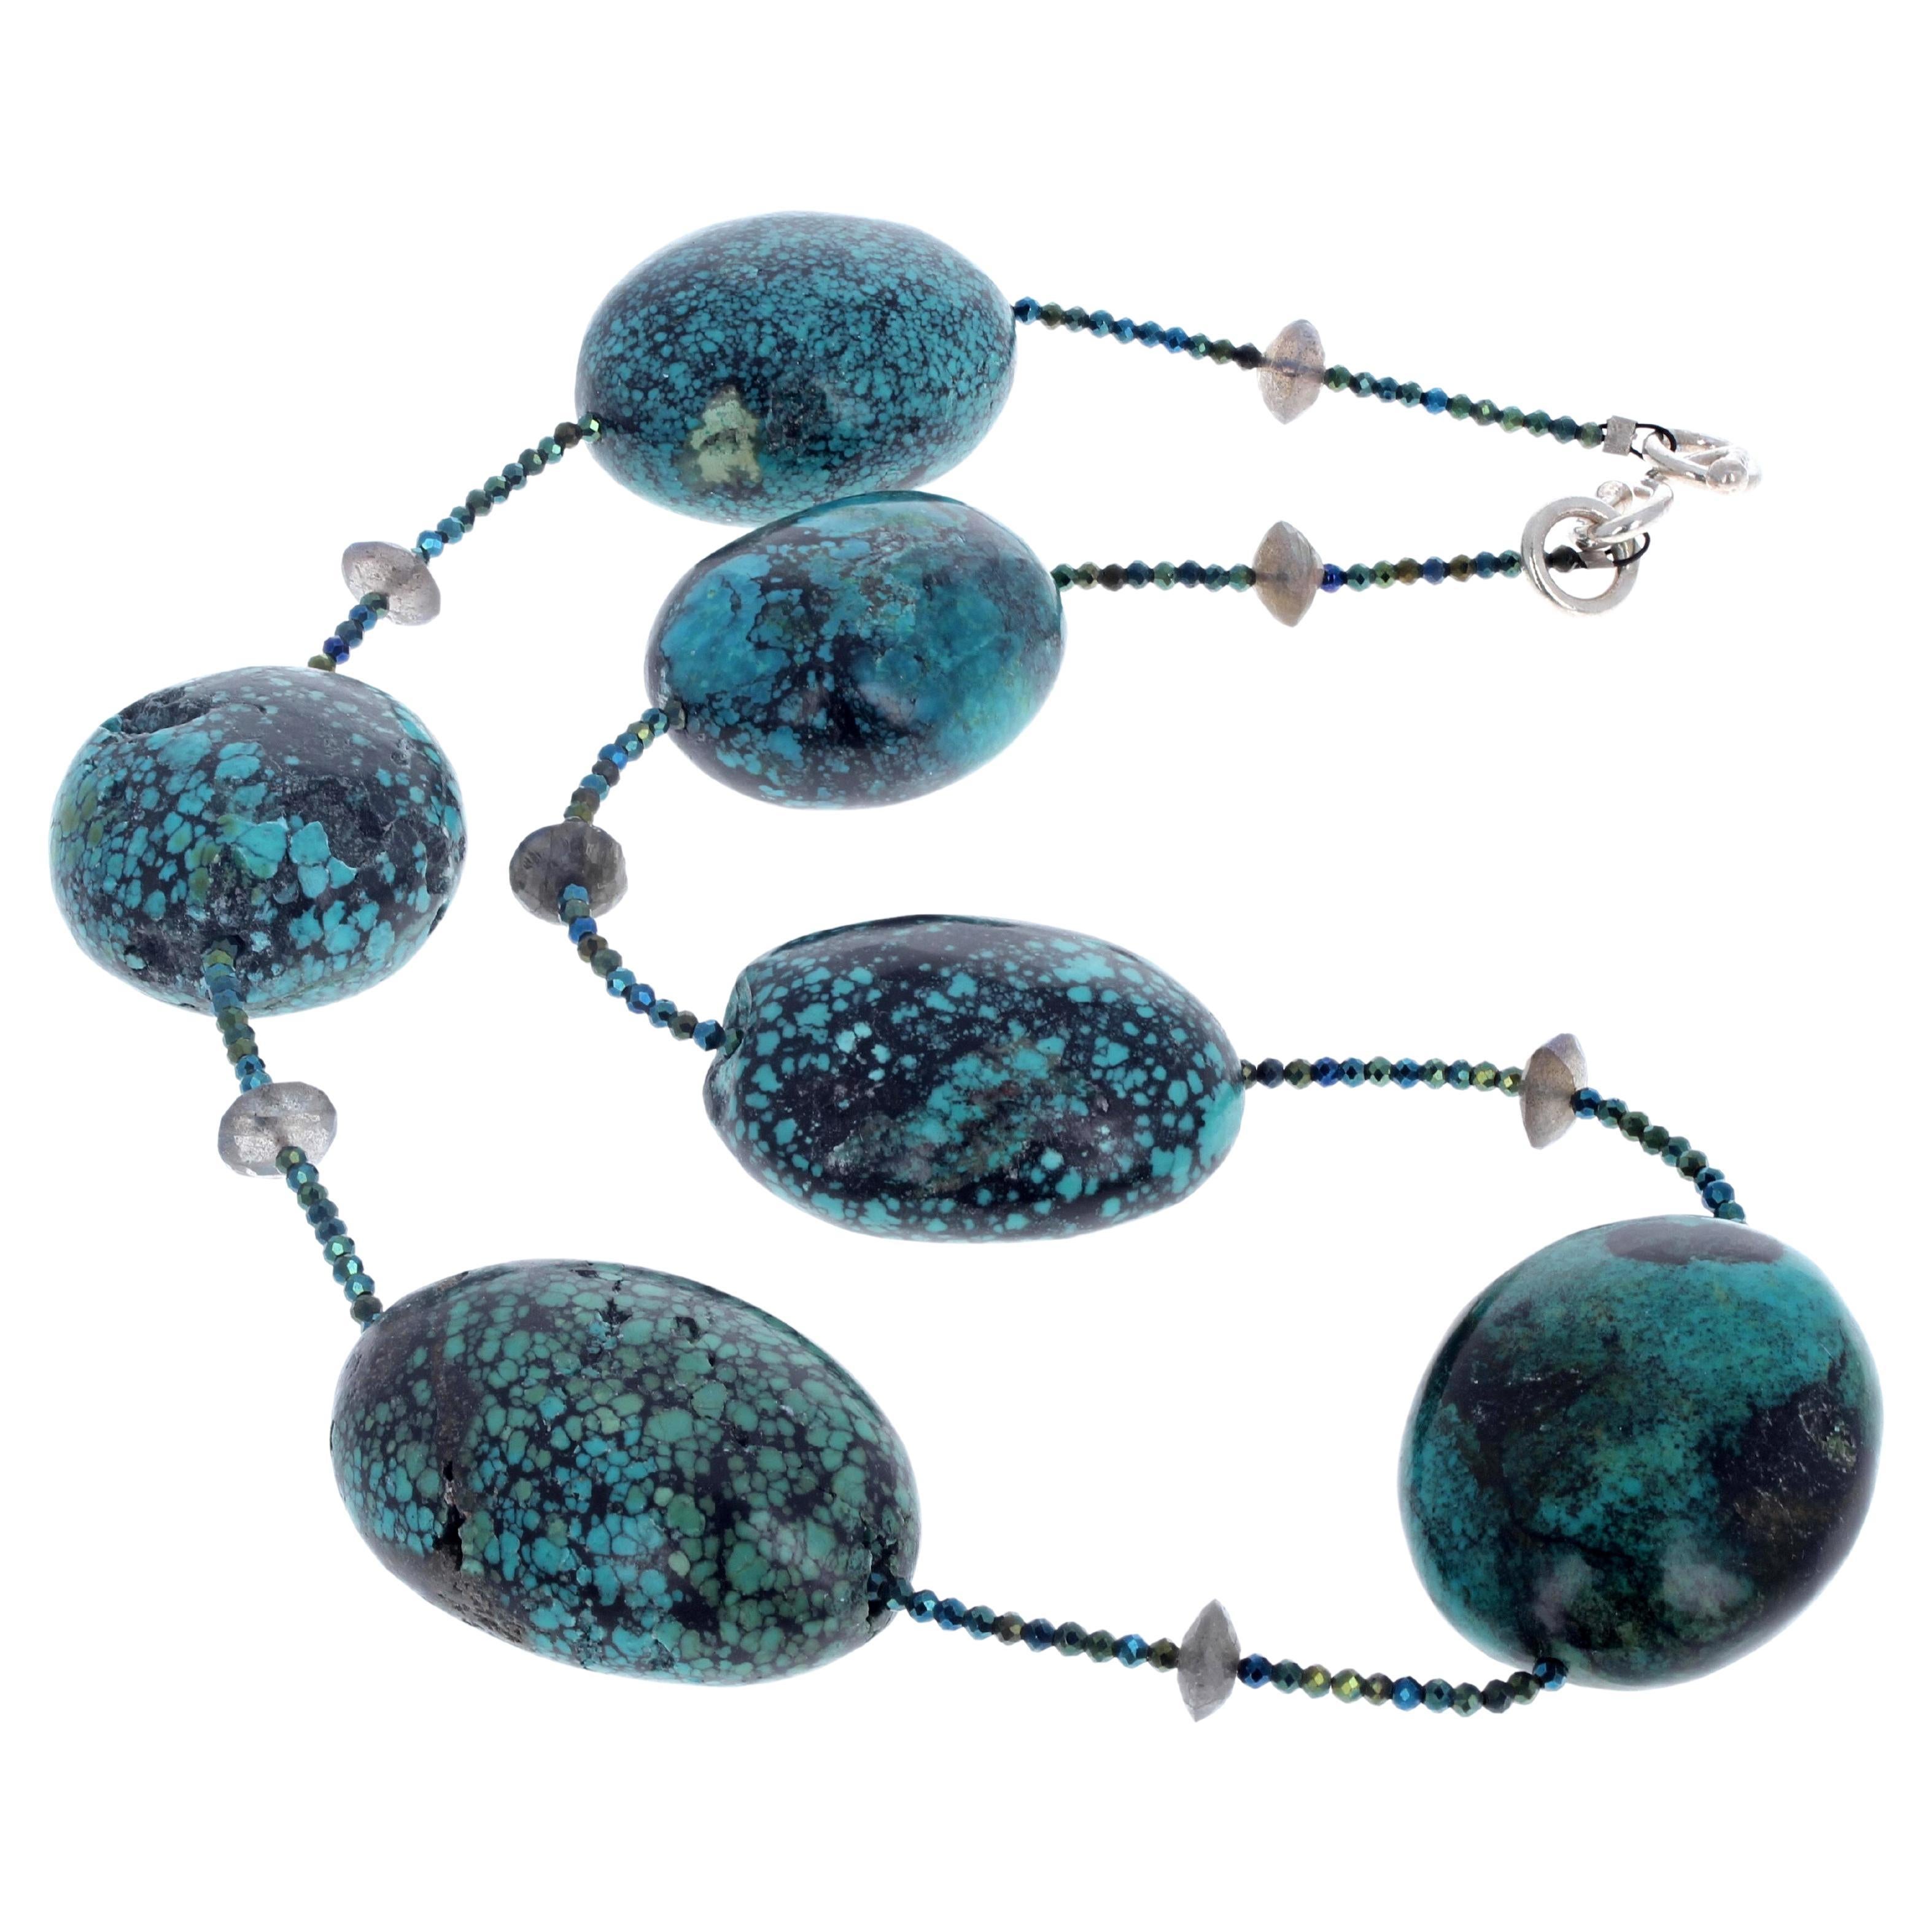 This spectacular glittering necklace is natural highly polished real rare type of Turquoise enhanced with sparkling real natural Labradorites in this 21 inches long necklace.  The largest Turquoises are approximately 38mm long x 28mm wide.  The